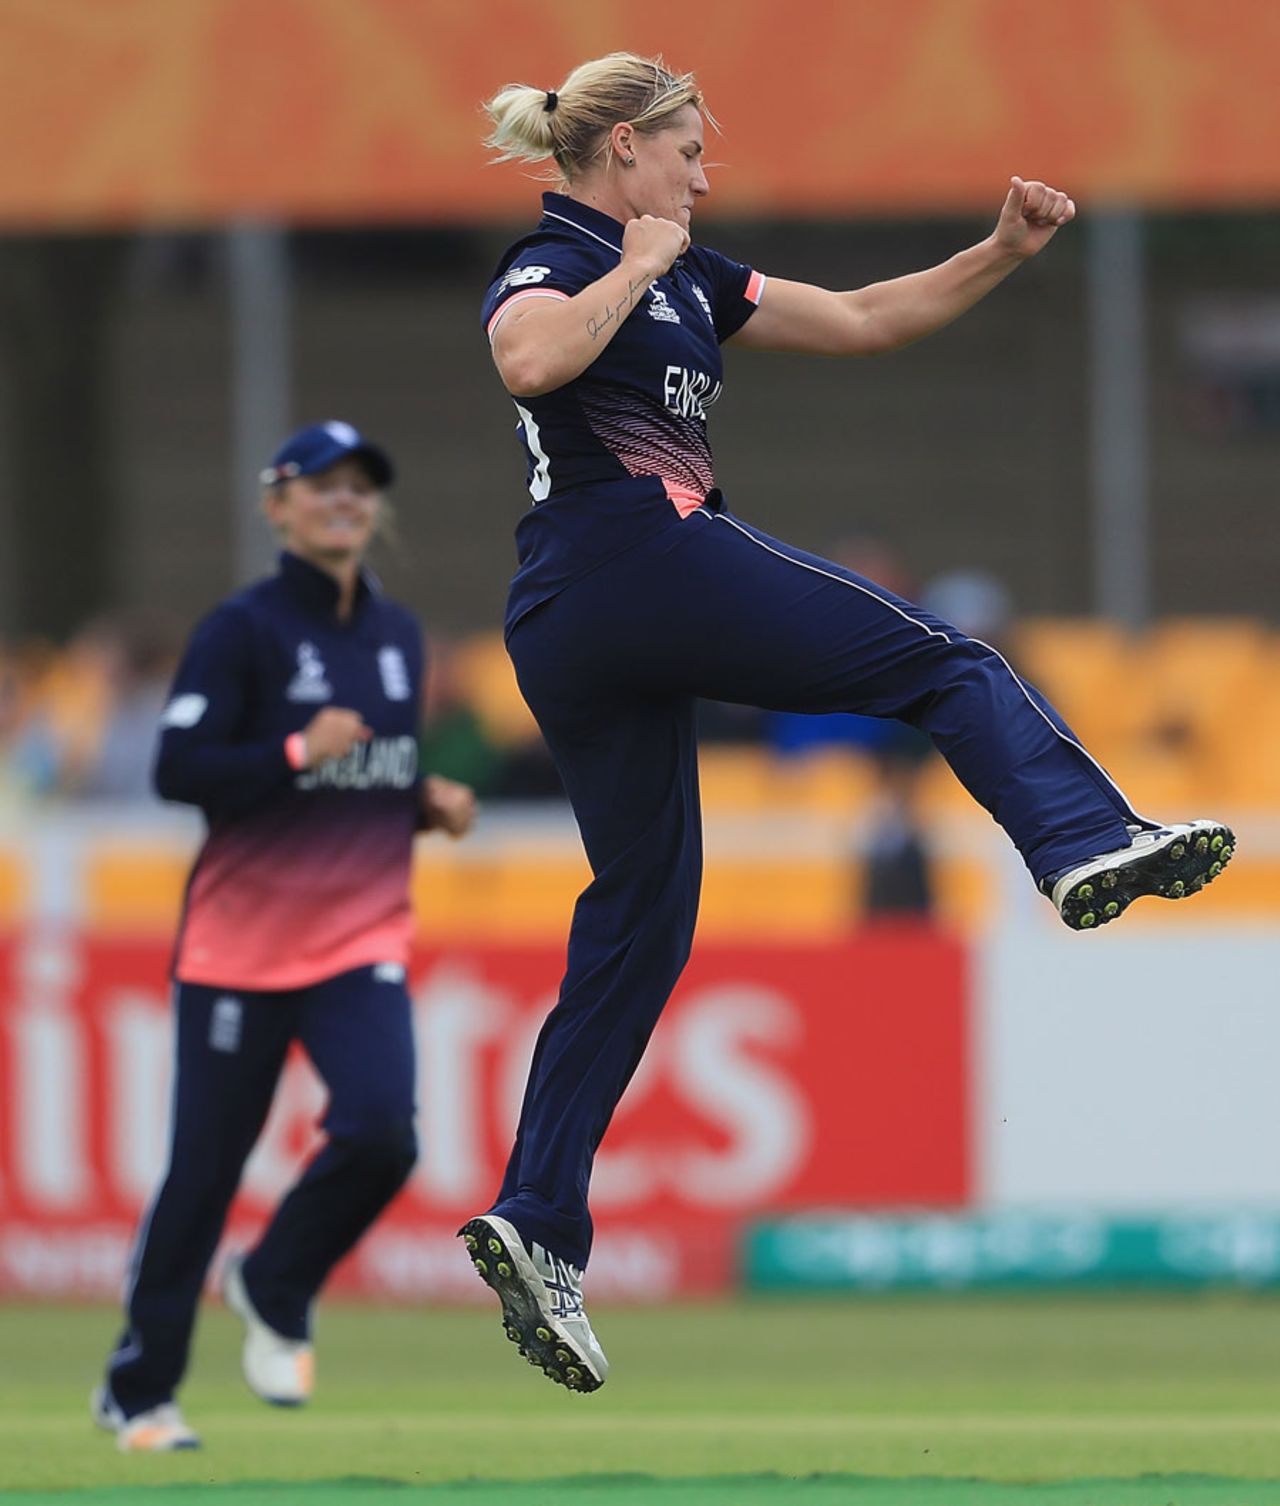 Katherine Brunt struck twice in his opening spell, England v Pakistan, Women's World Cup, Leicester, June 27, 2017